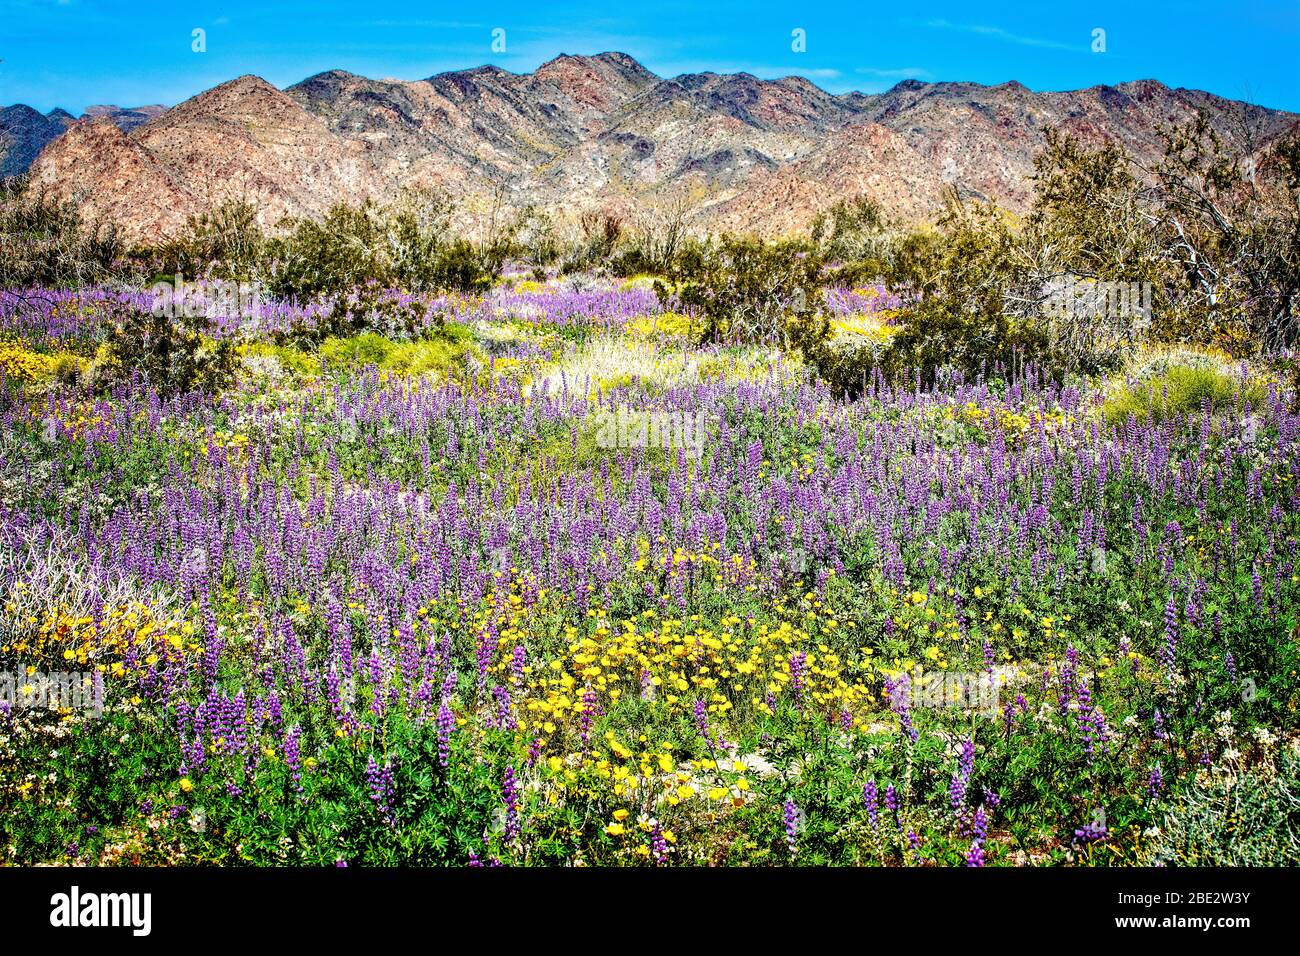 Sprint wildflowers bloom in the lower elevations of Joshua Tree National Park, California. Stock Photo